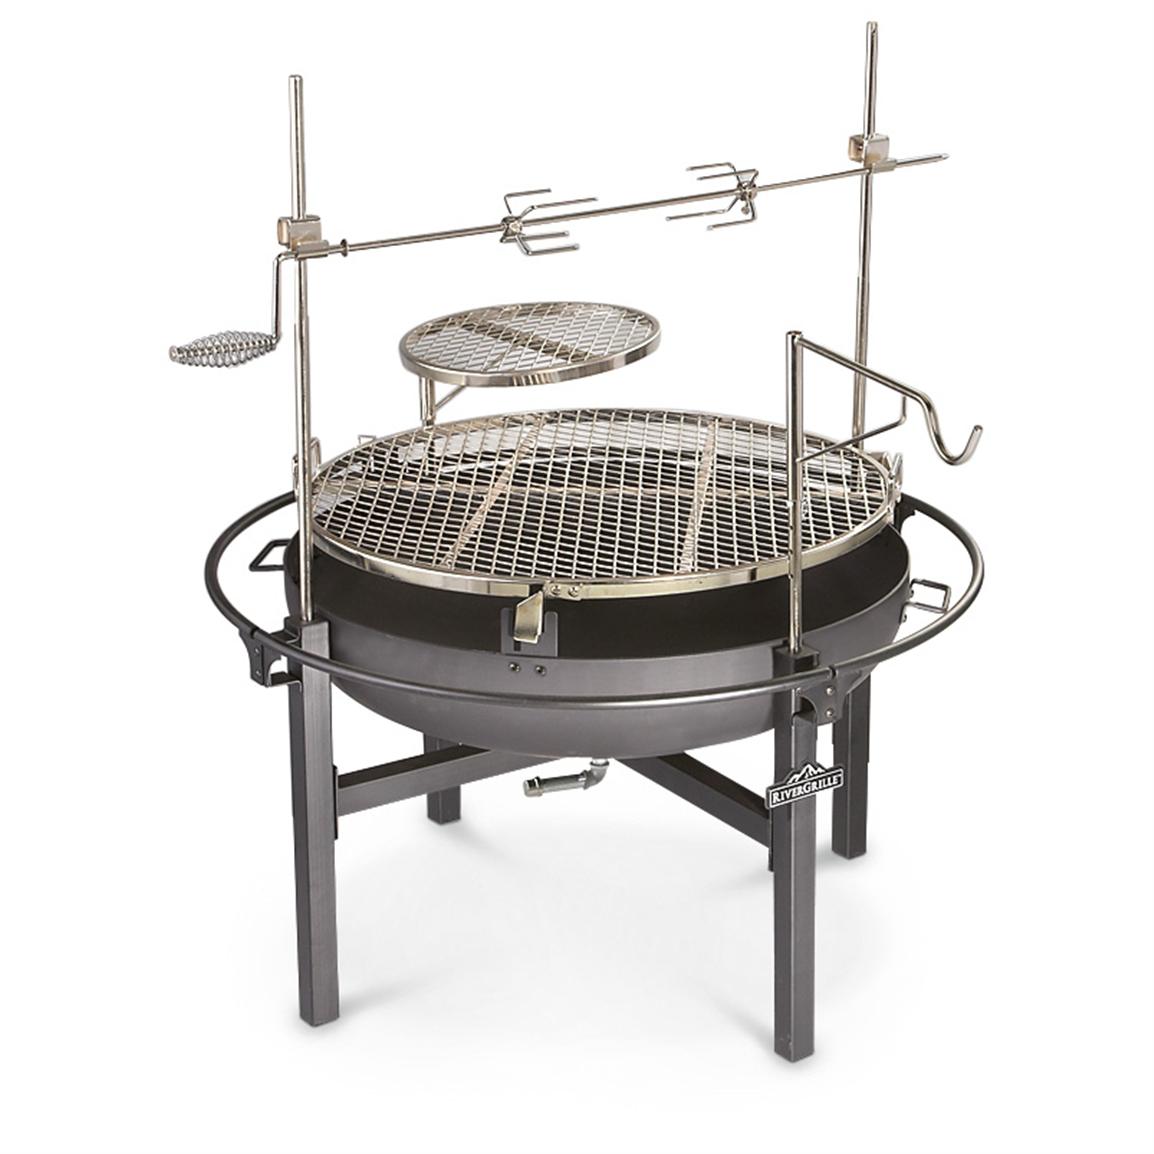 Man Cooking with Tripod Gas Cooker Cowboy Fire Pit Rotisserie Grill 282386 Stoves at 